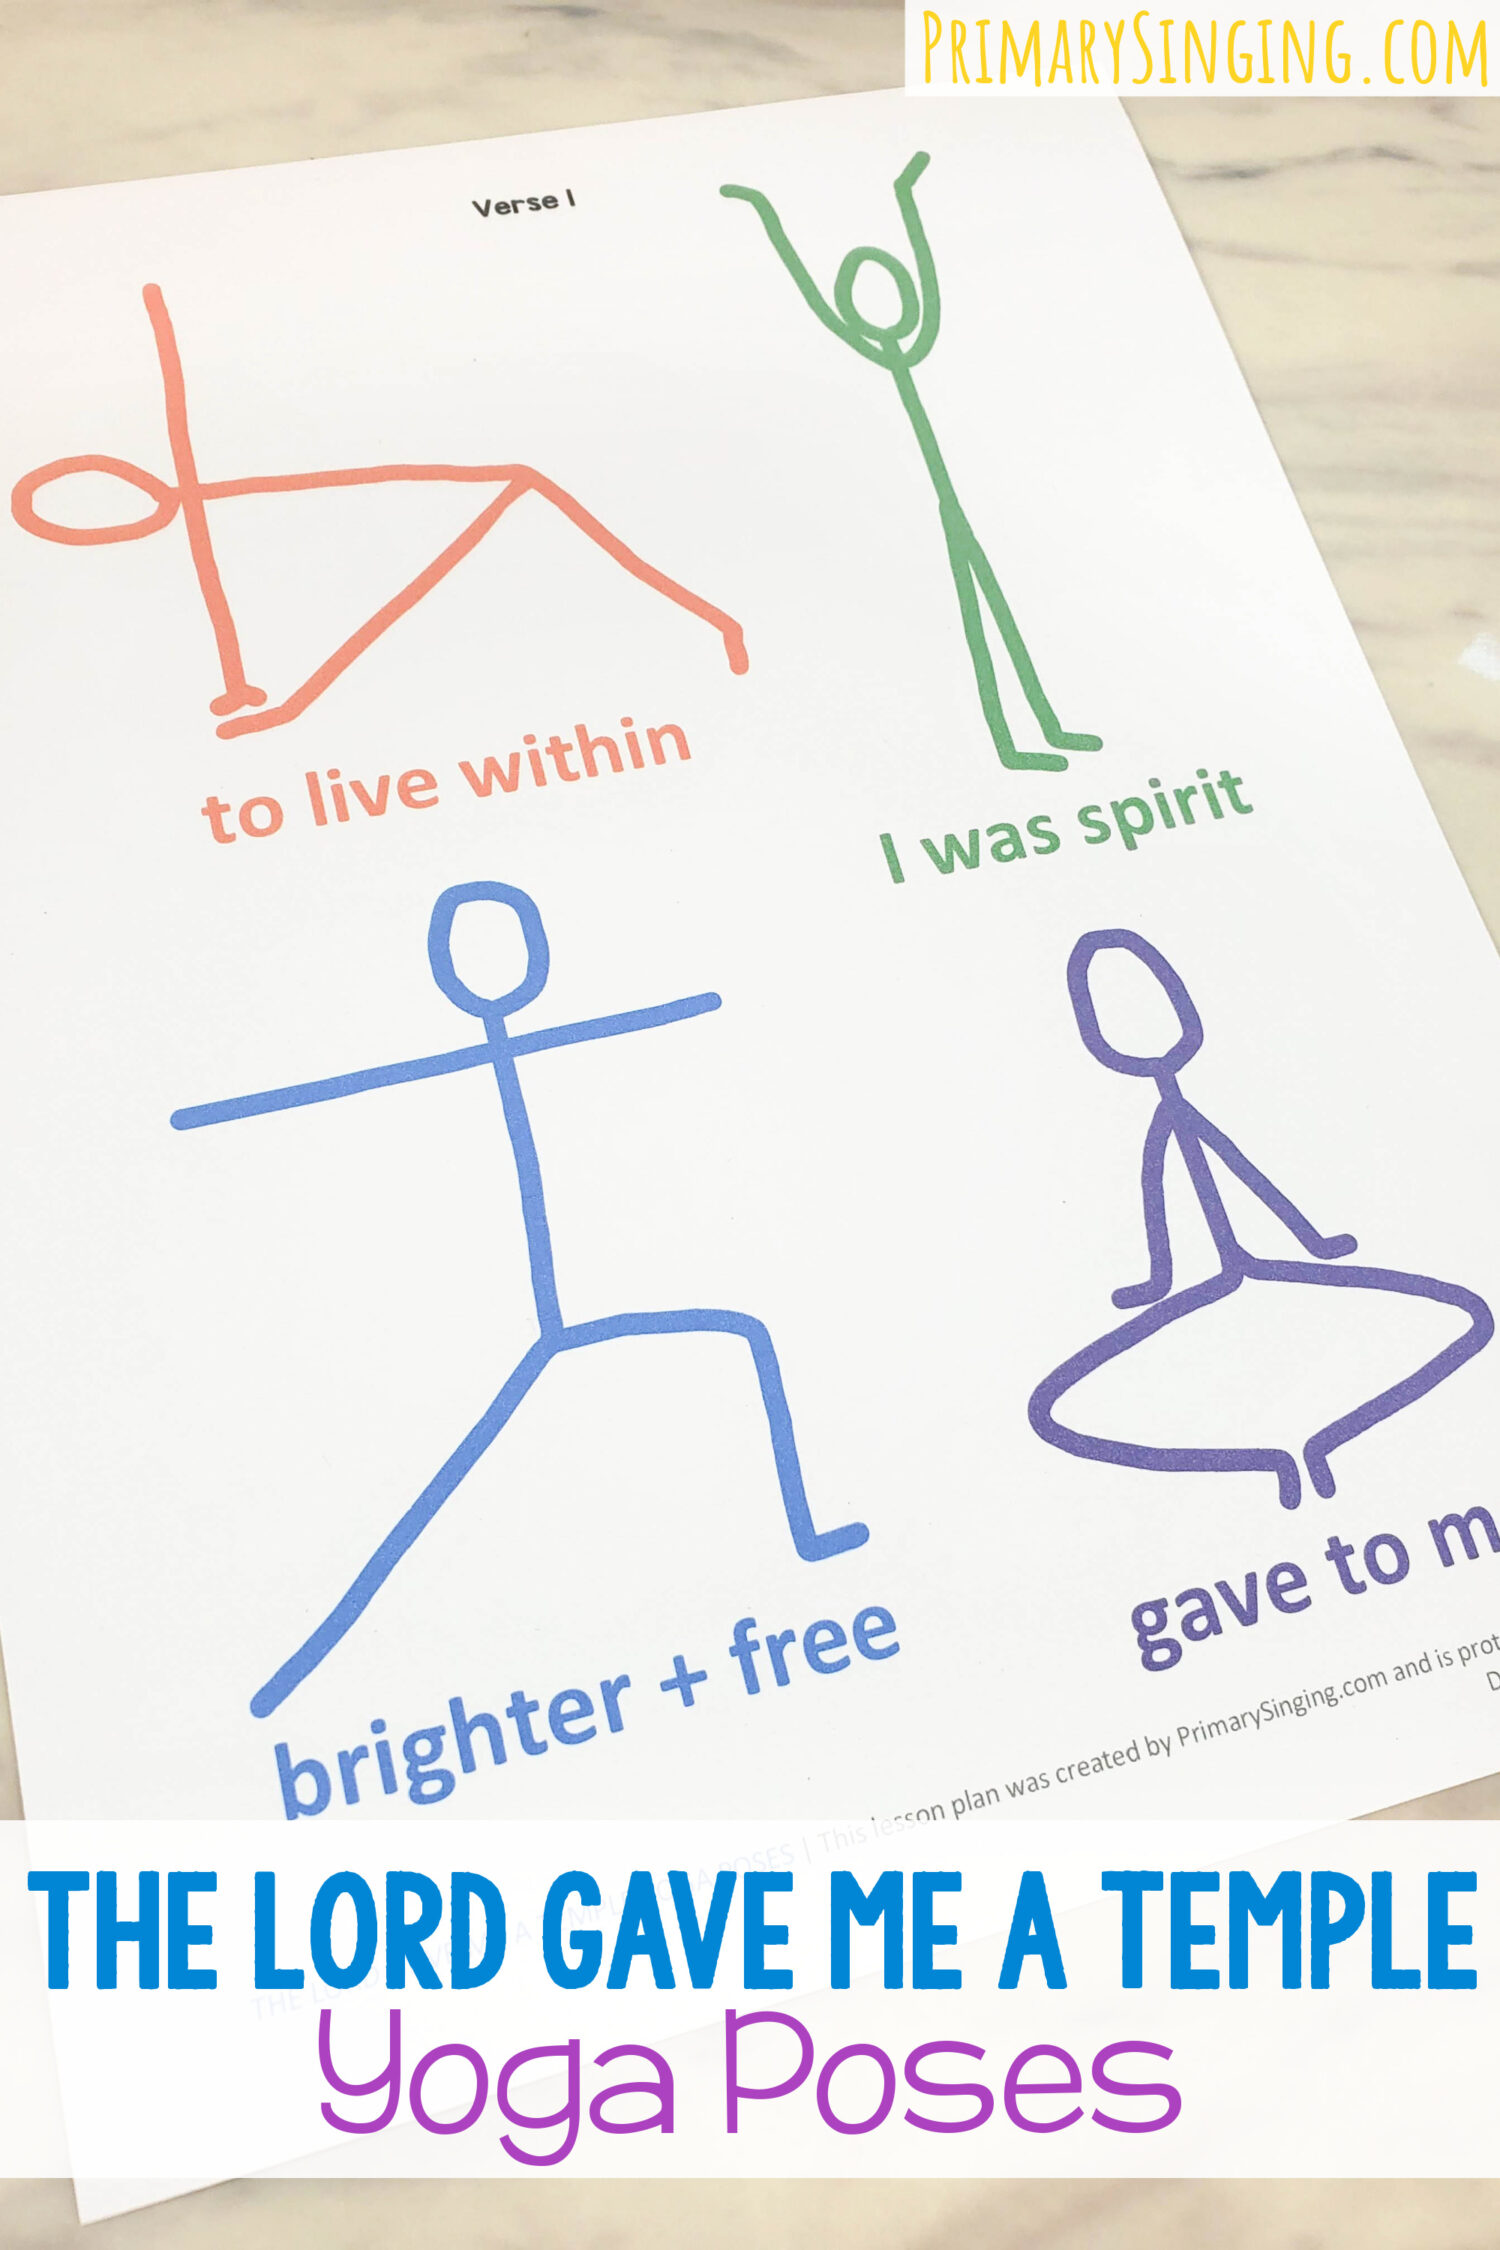 The Lord Gave Me a Temple yoga poses singing time activity! This is a great way to add in movement while connecting with the message of the importance of taking care of our bodies. Includes printable song poster for LDS Primary music leaders.